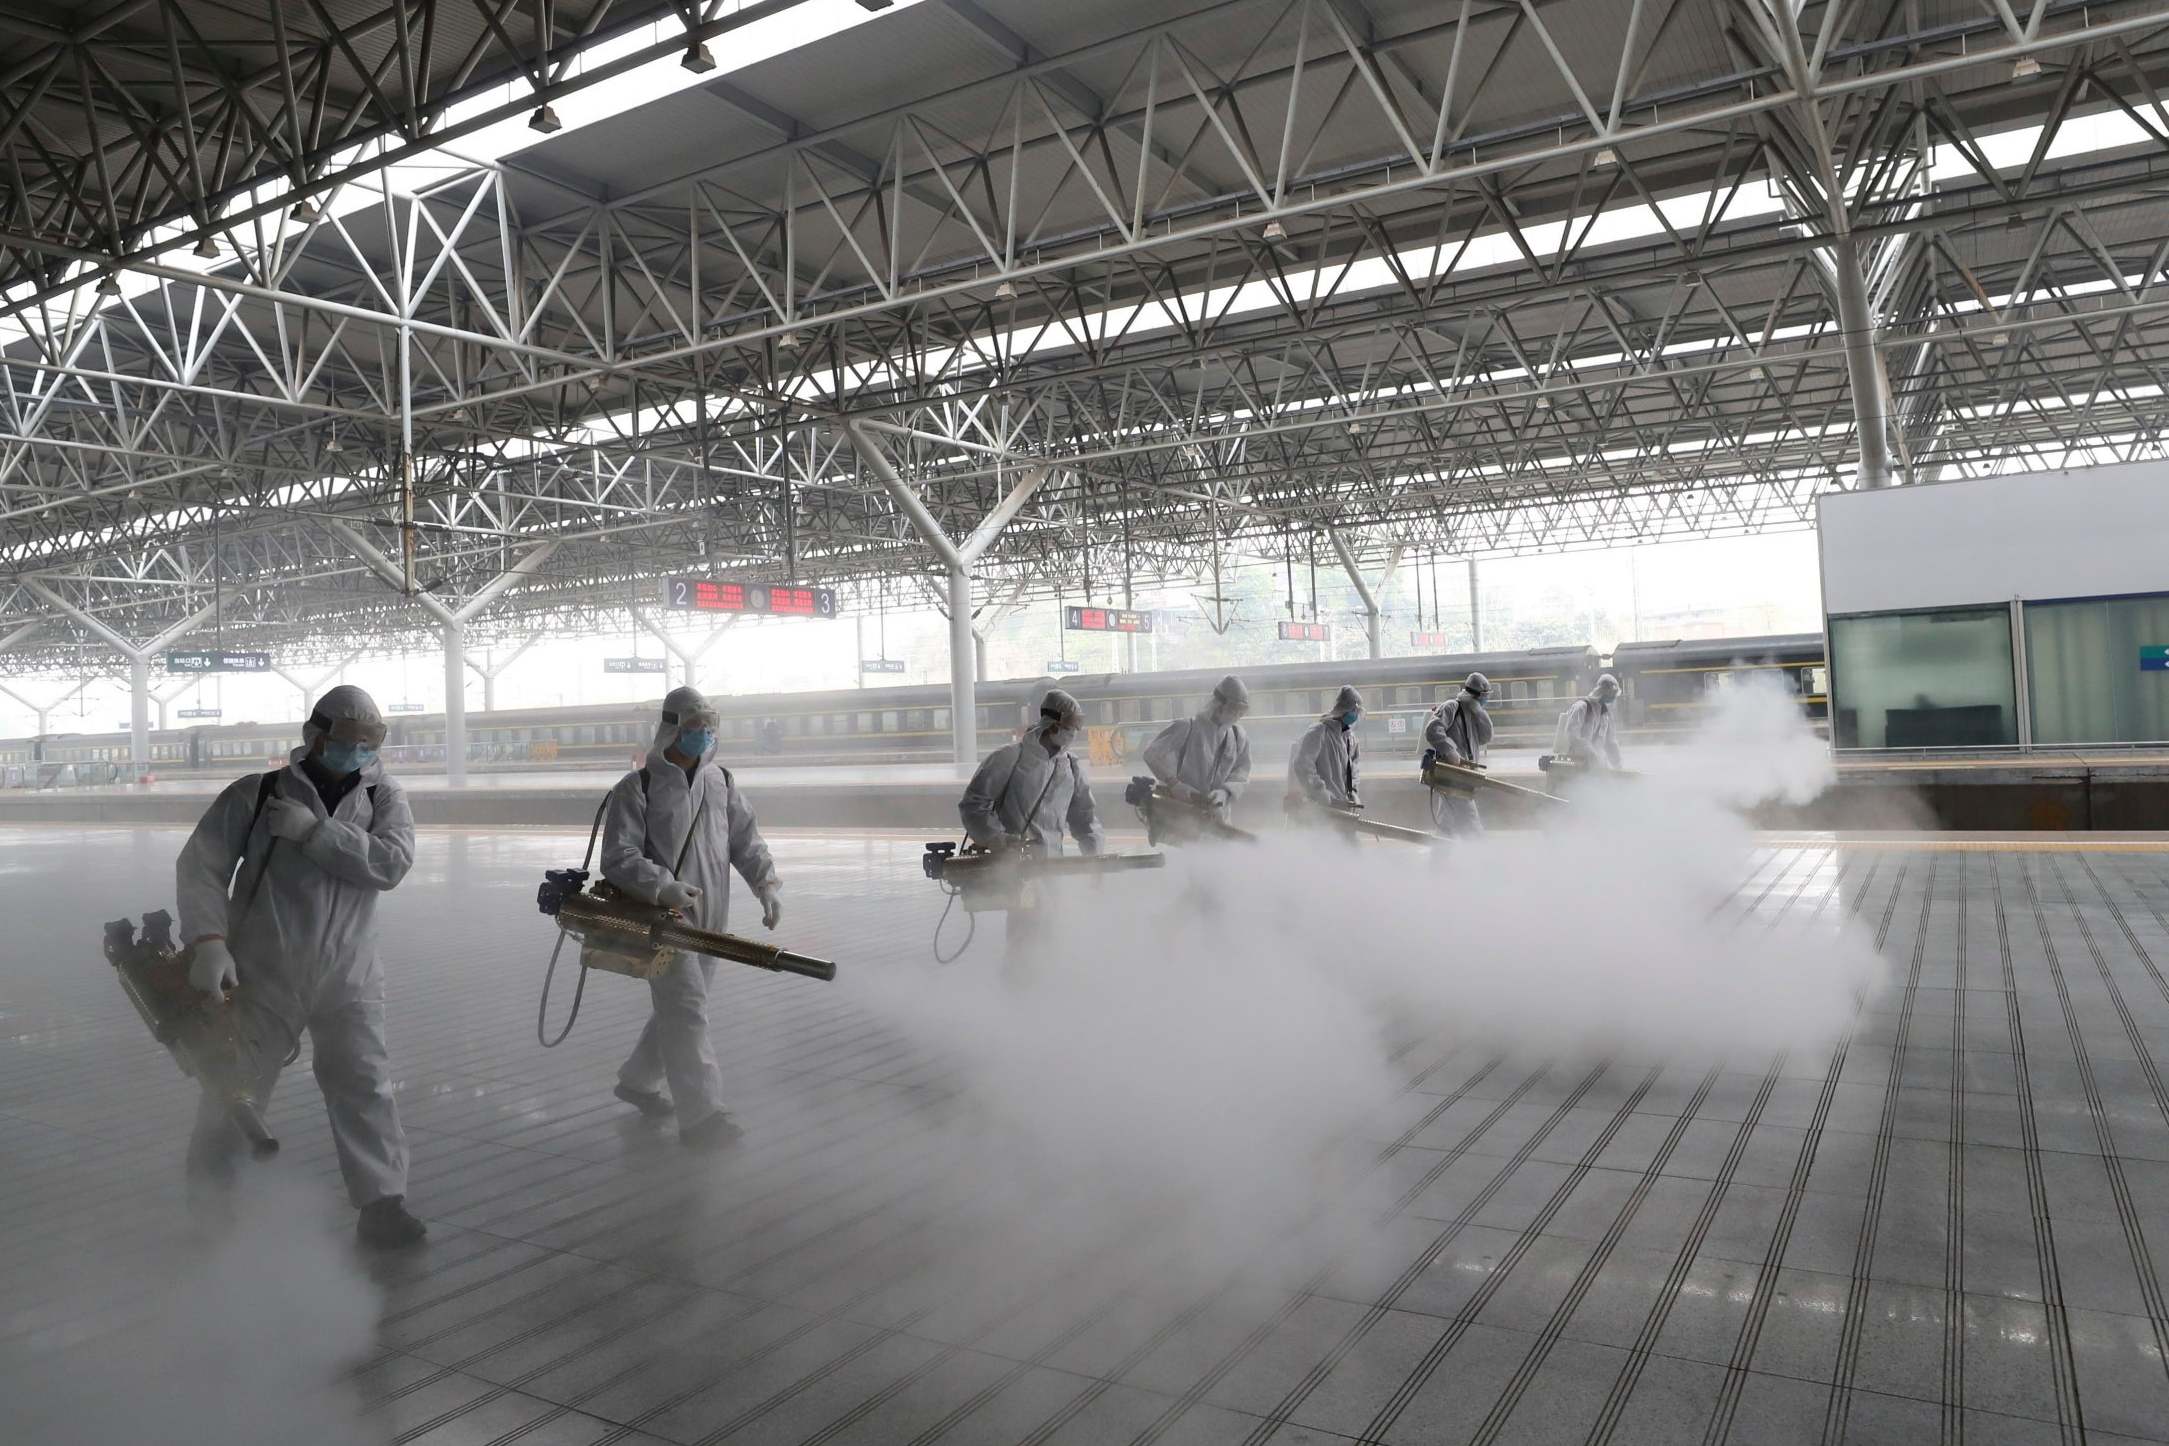 Firefighters disinfect a train platform in China, where public transport has partially reopened after months of lockdown